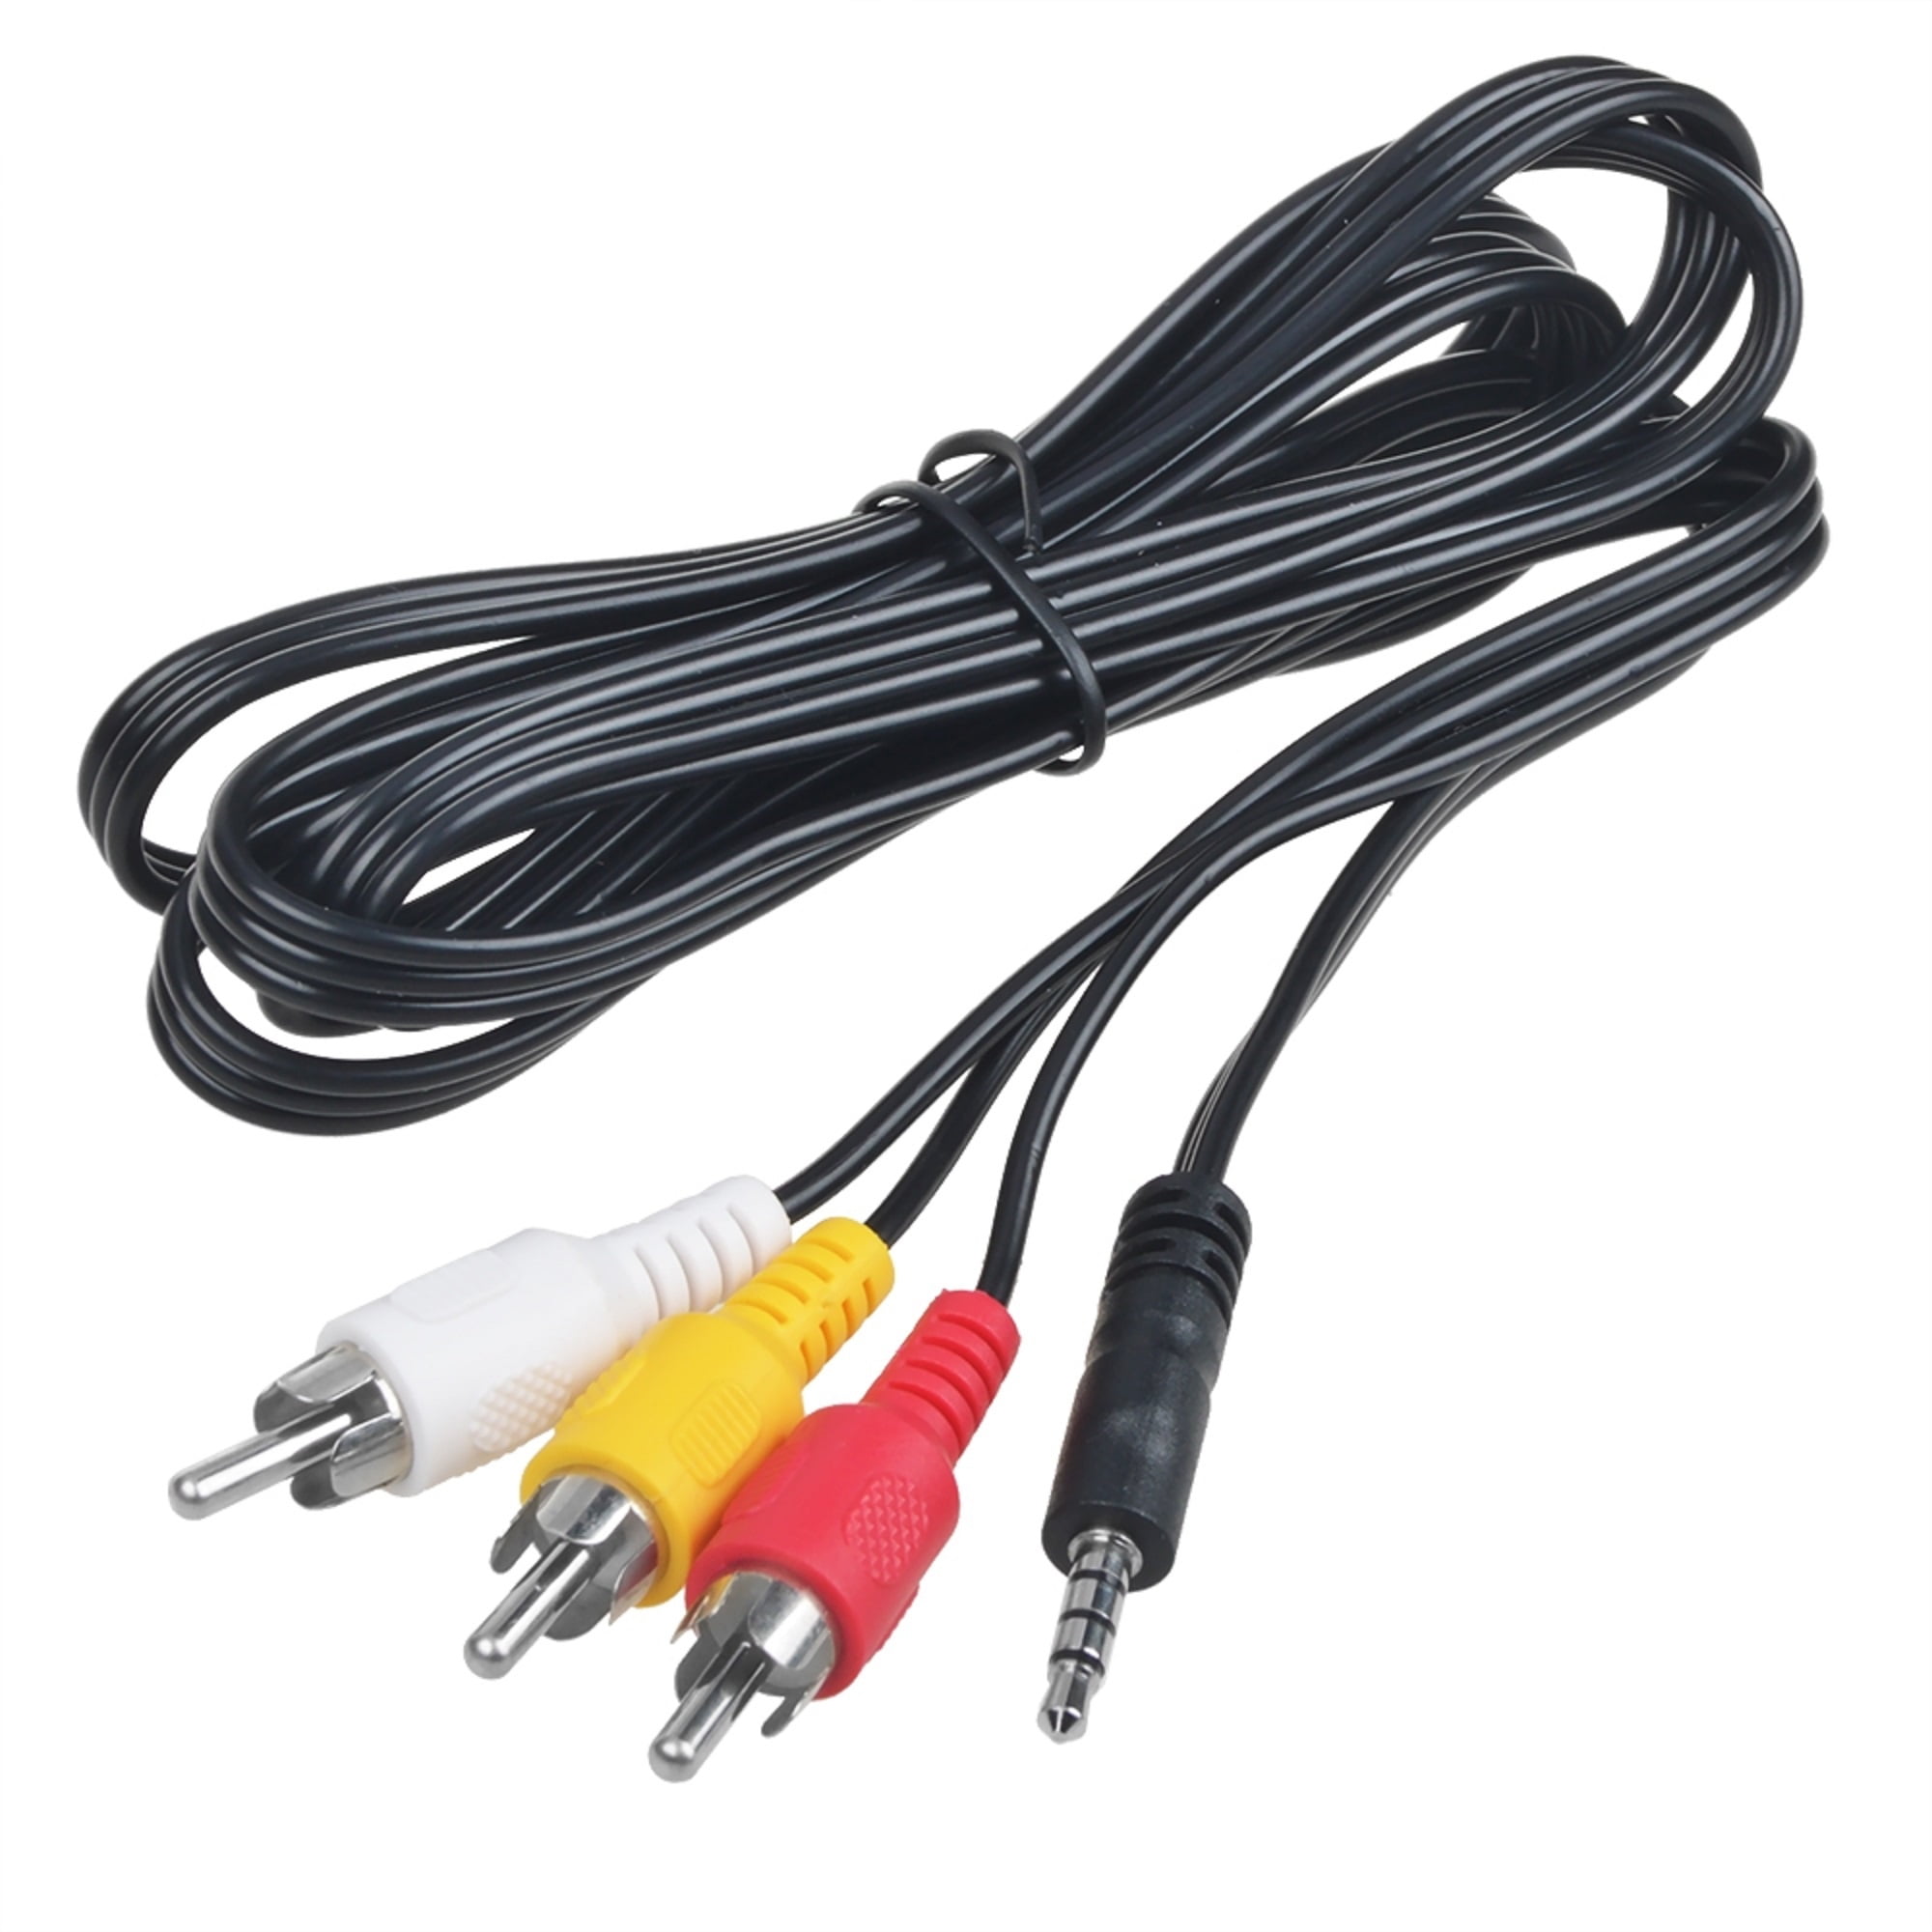 AV A/V TV VIDEO Cable Cord Lead For Samsung SMX-F30/RN SMX-F30BP SMX-F30BN F30SP 